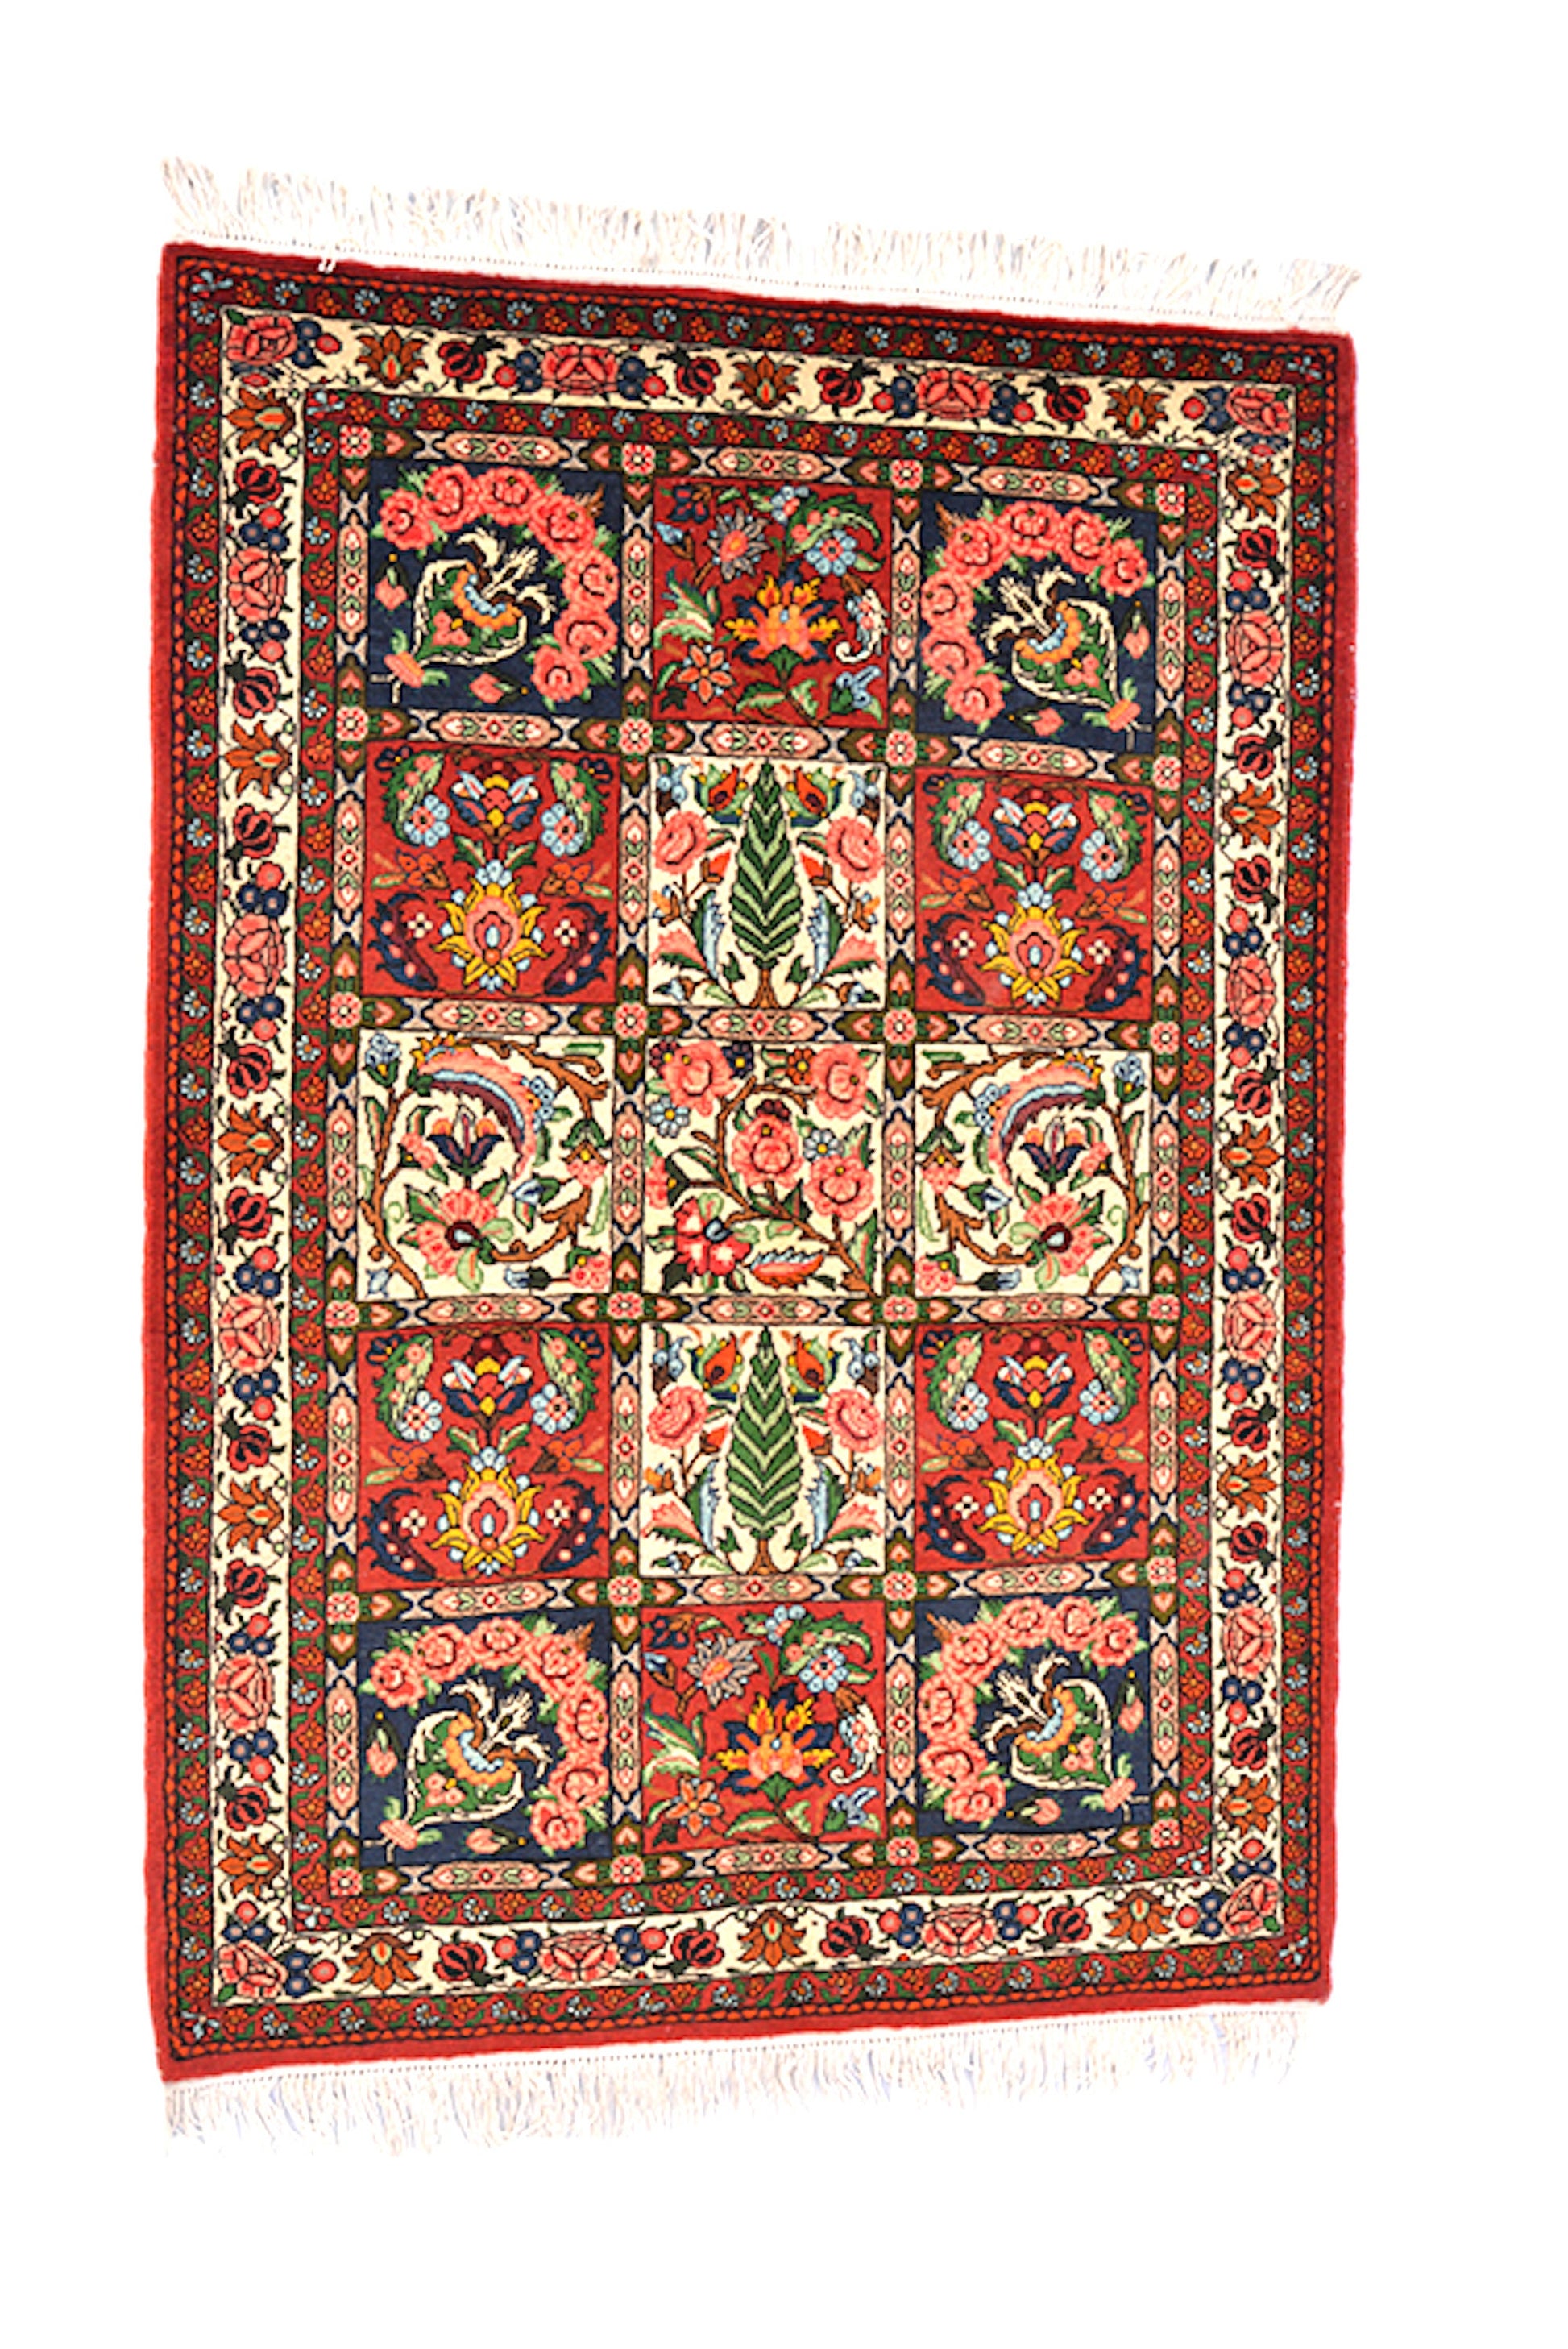 One of a kind Colorful Antique Rug | 3 x 5 Persian Caucasian Rug | Living Room Rug | Accent Handmade Wool Rug | Oriental Floral Pattern Rug